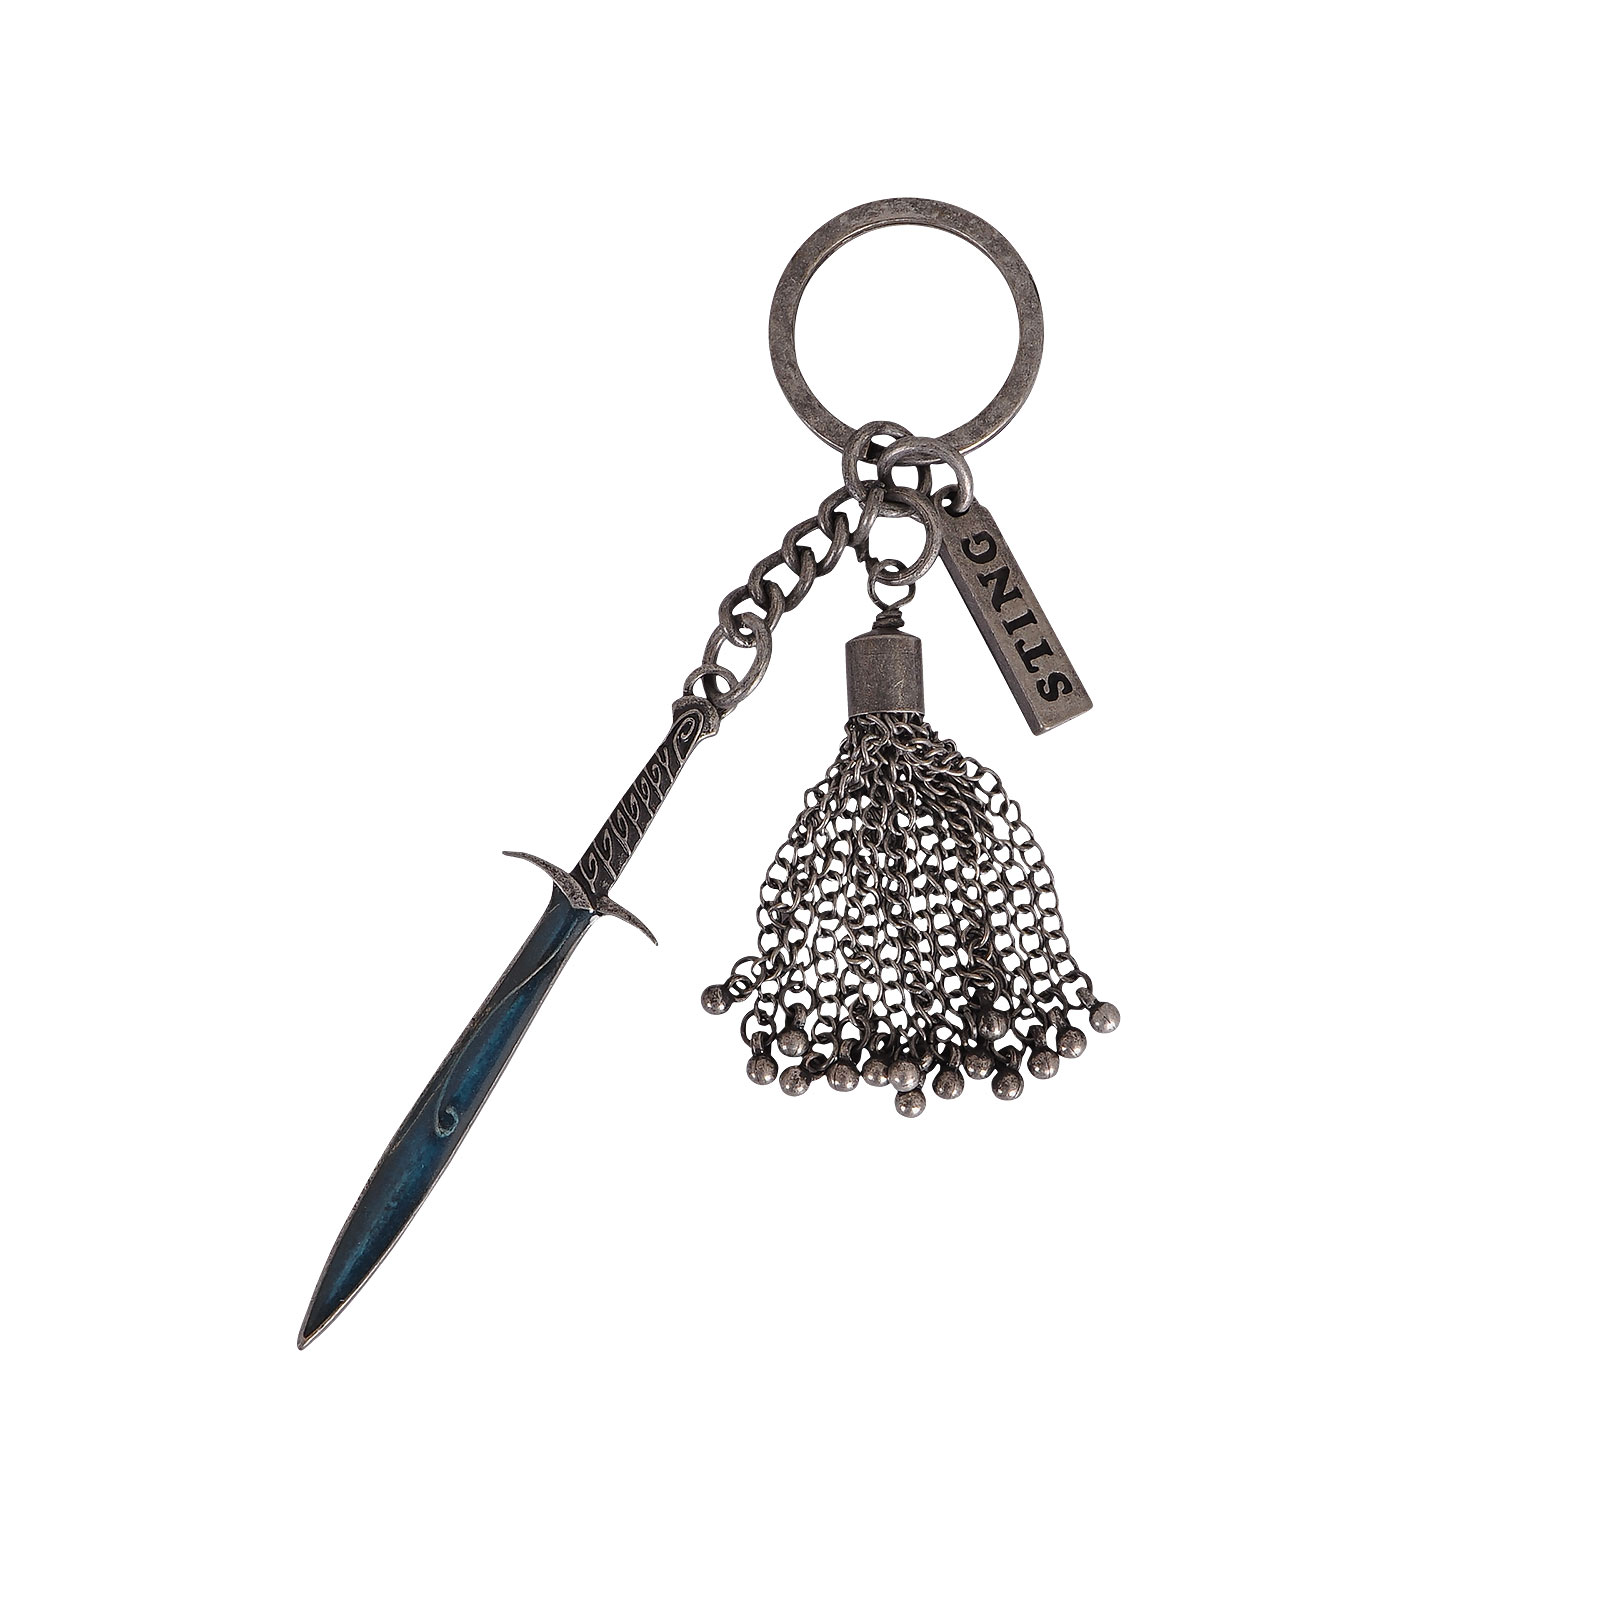 Lord of the Rings - Sting Keychain